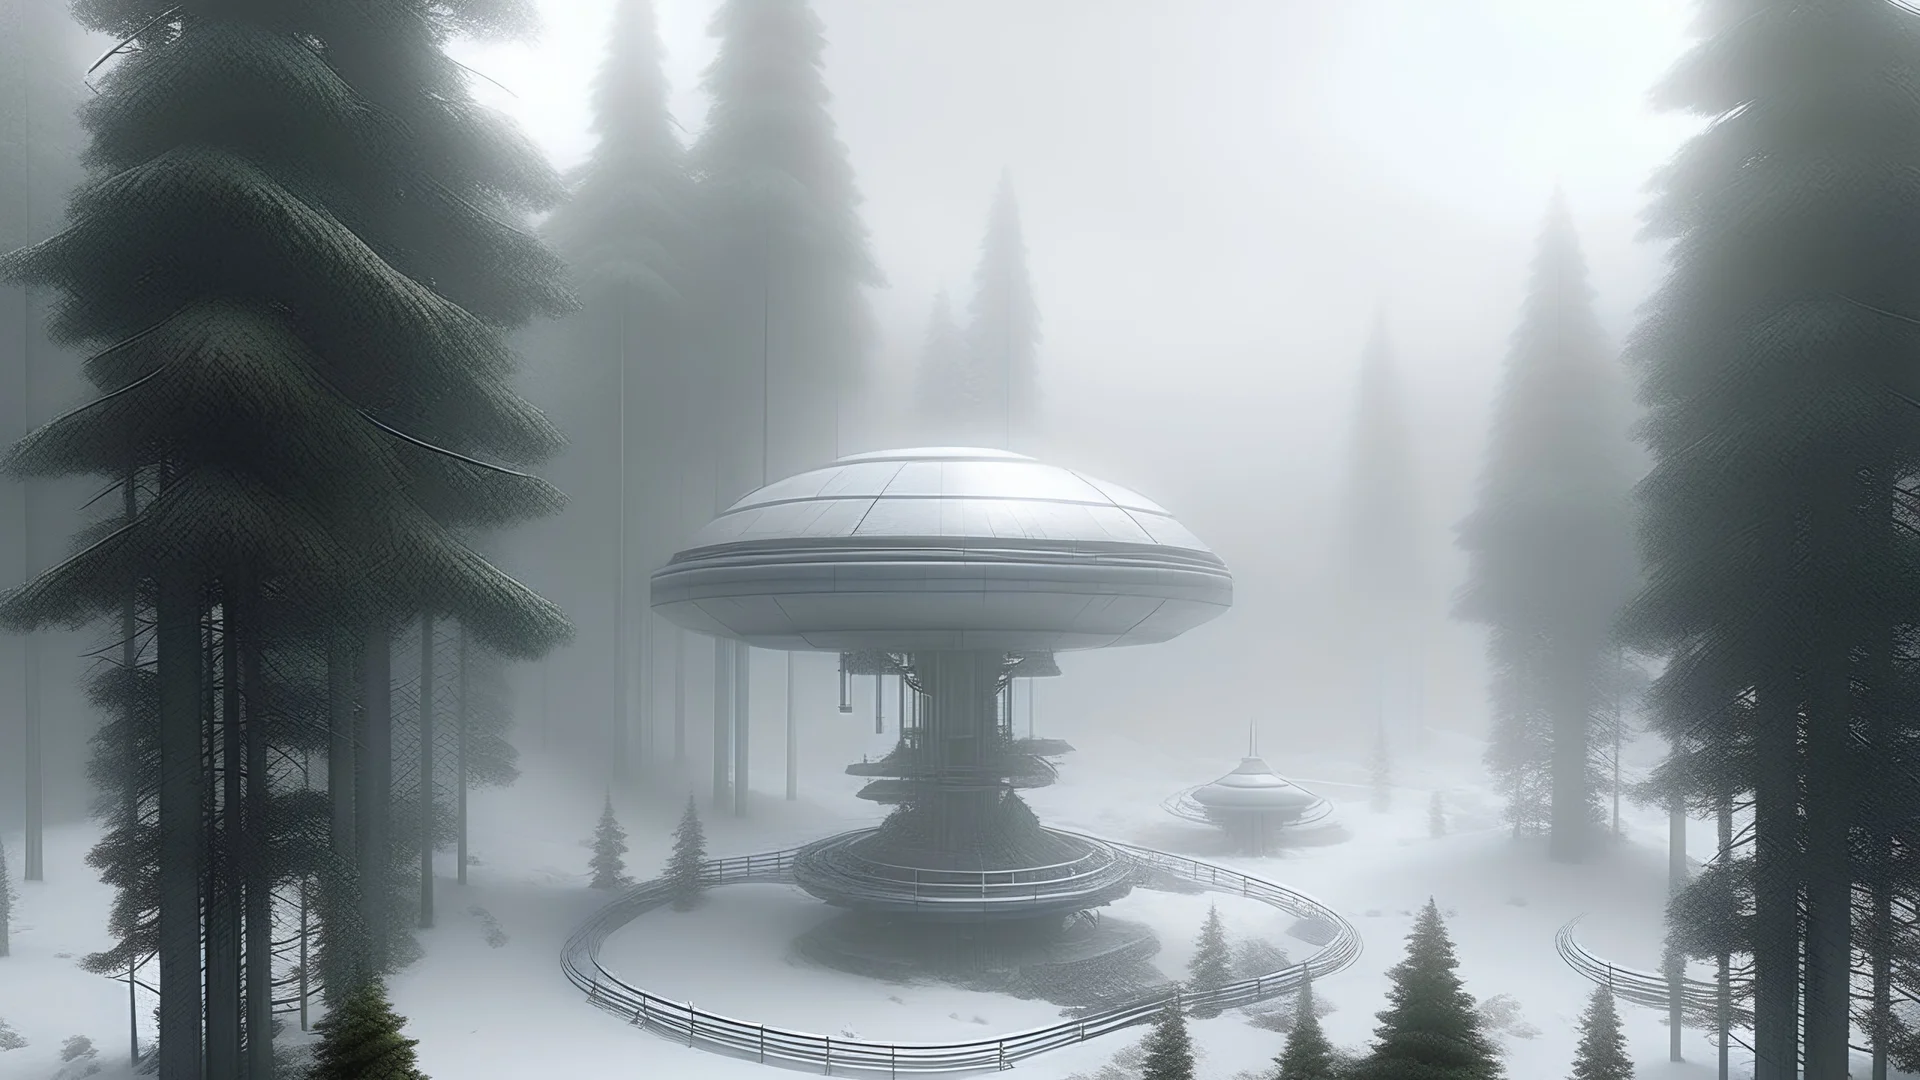 a station for spaceship passengers embedded in a forest with a landing pad. The stations use the base of big trees and trees grow out of the top. Some of the trees grow through the stations because they're so big. This is in a blizzard setting.